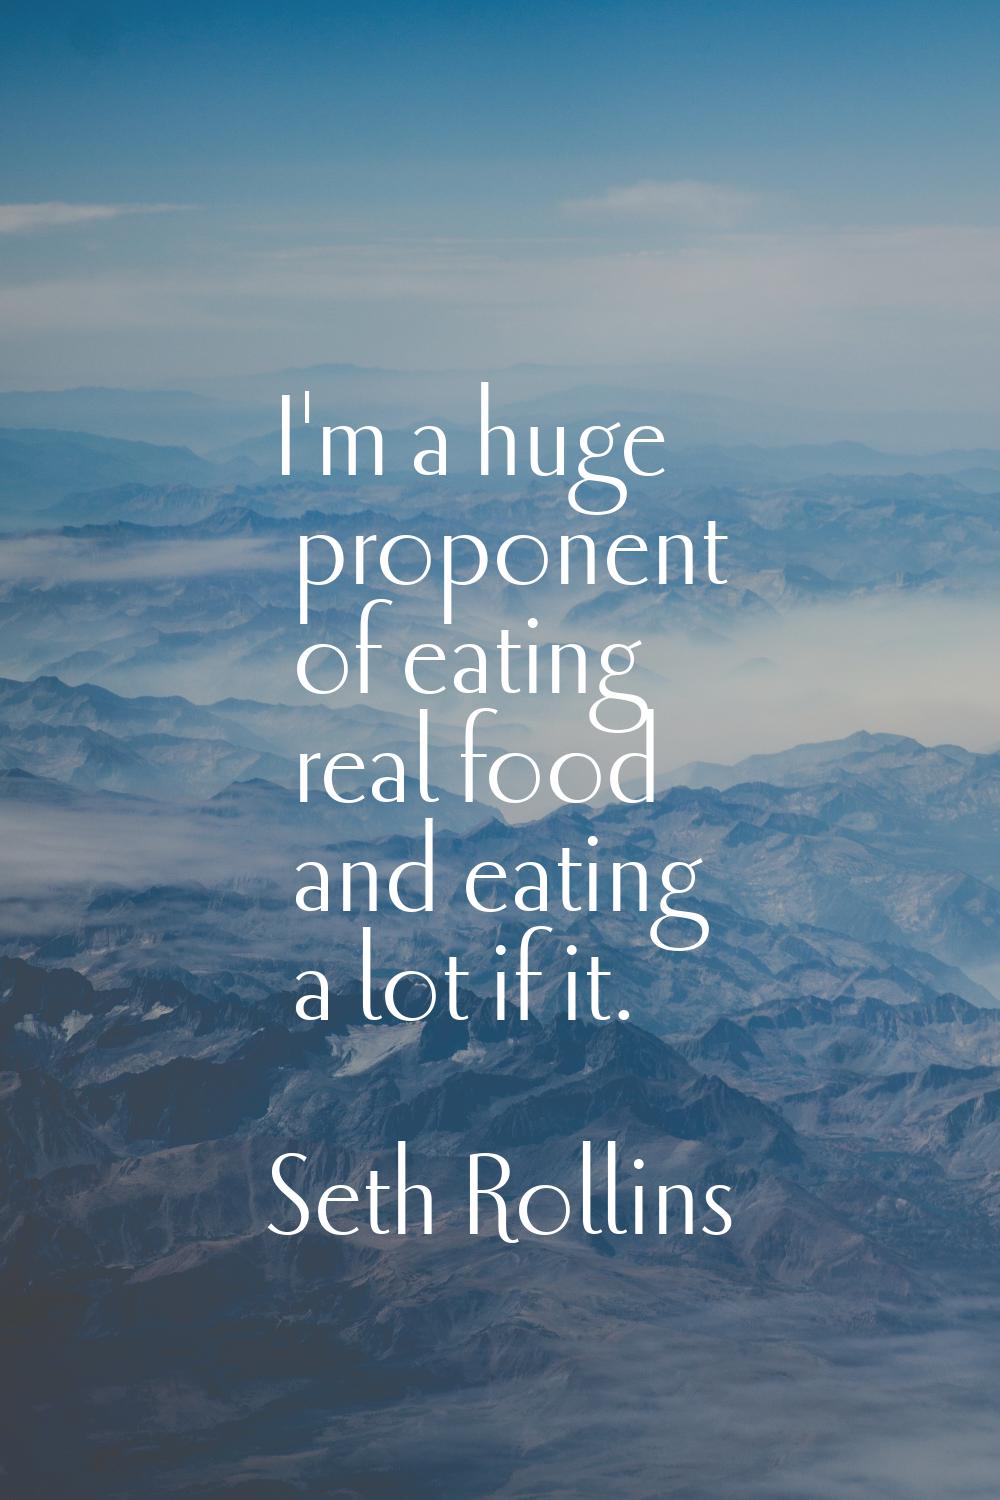 I'm a huge proponent of eating real food and eating a lot if it.